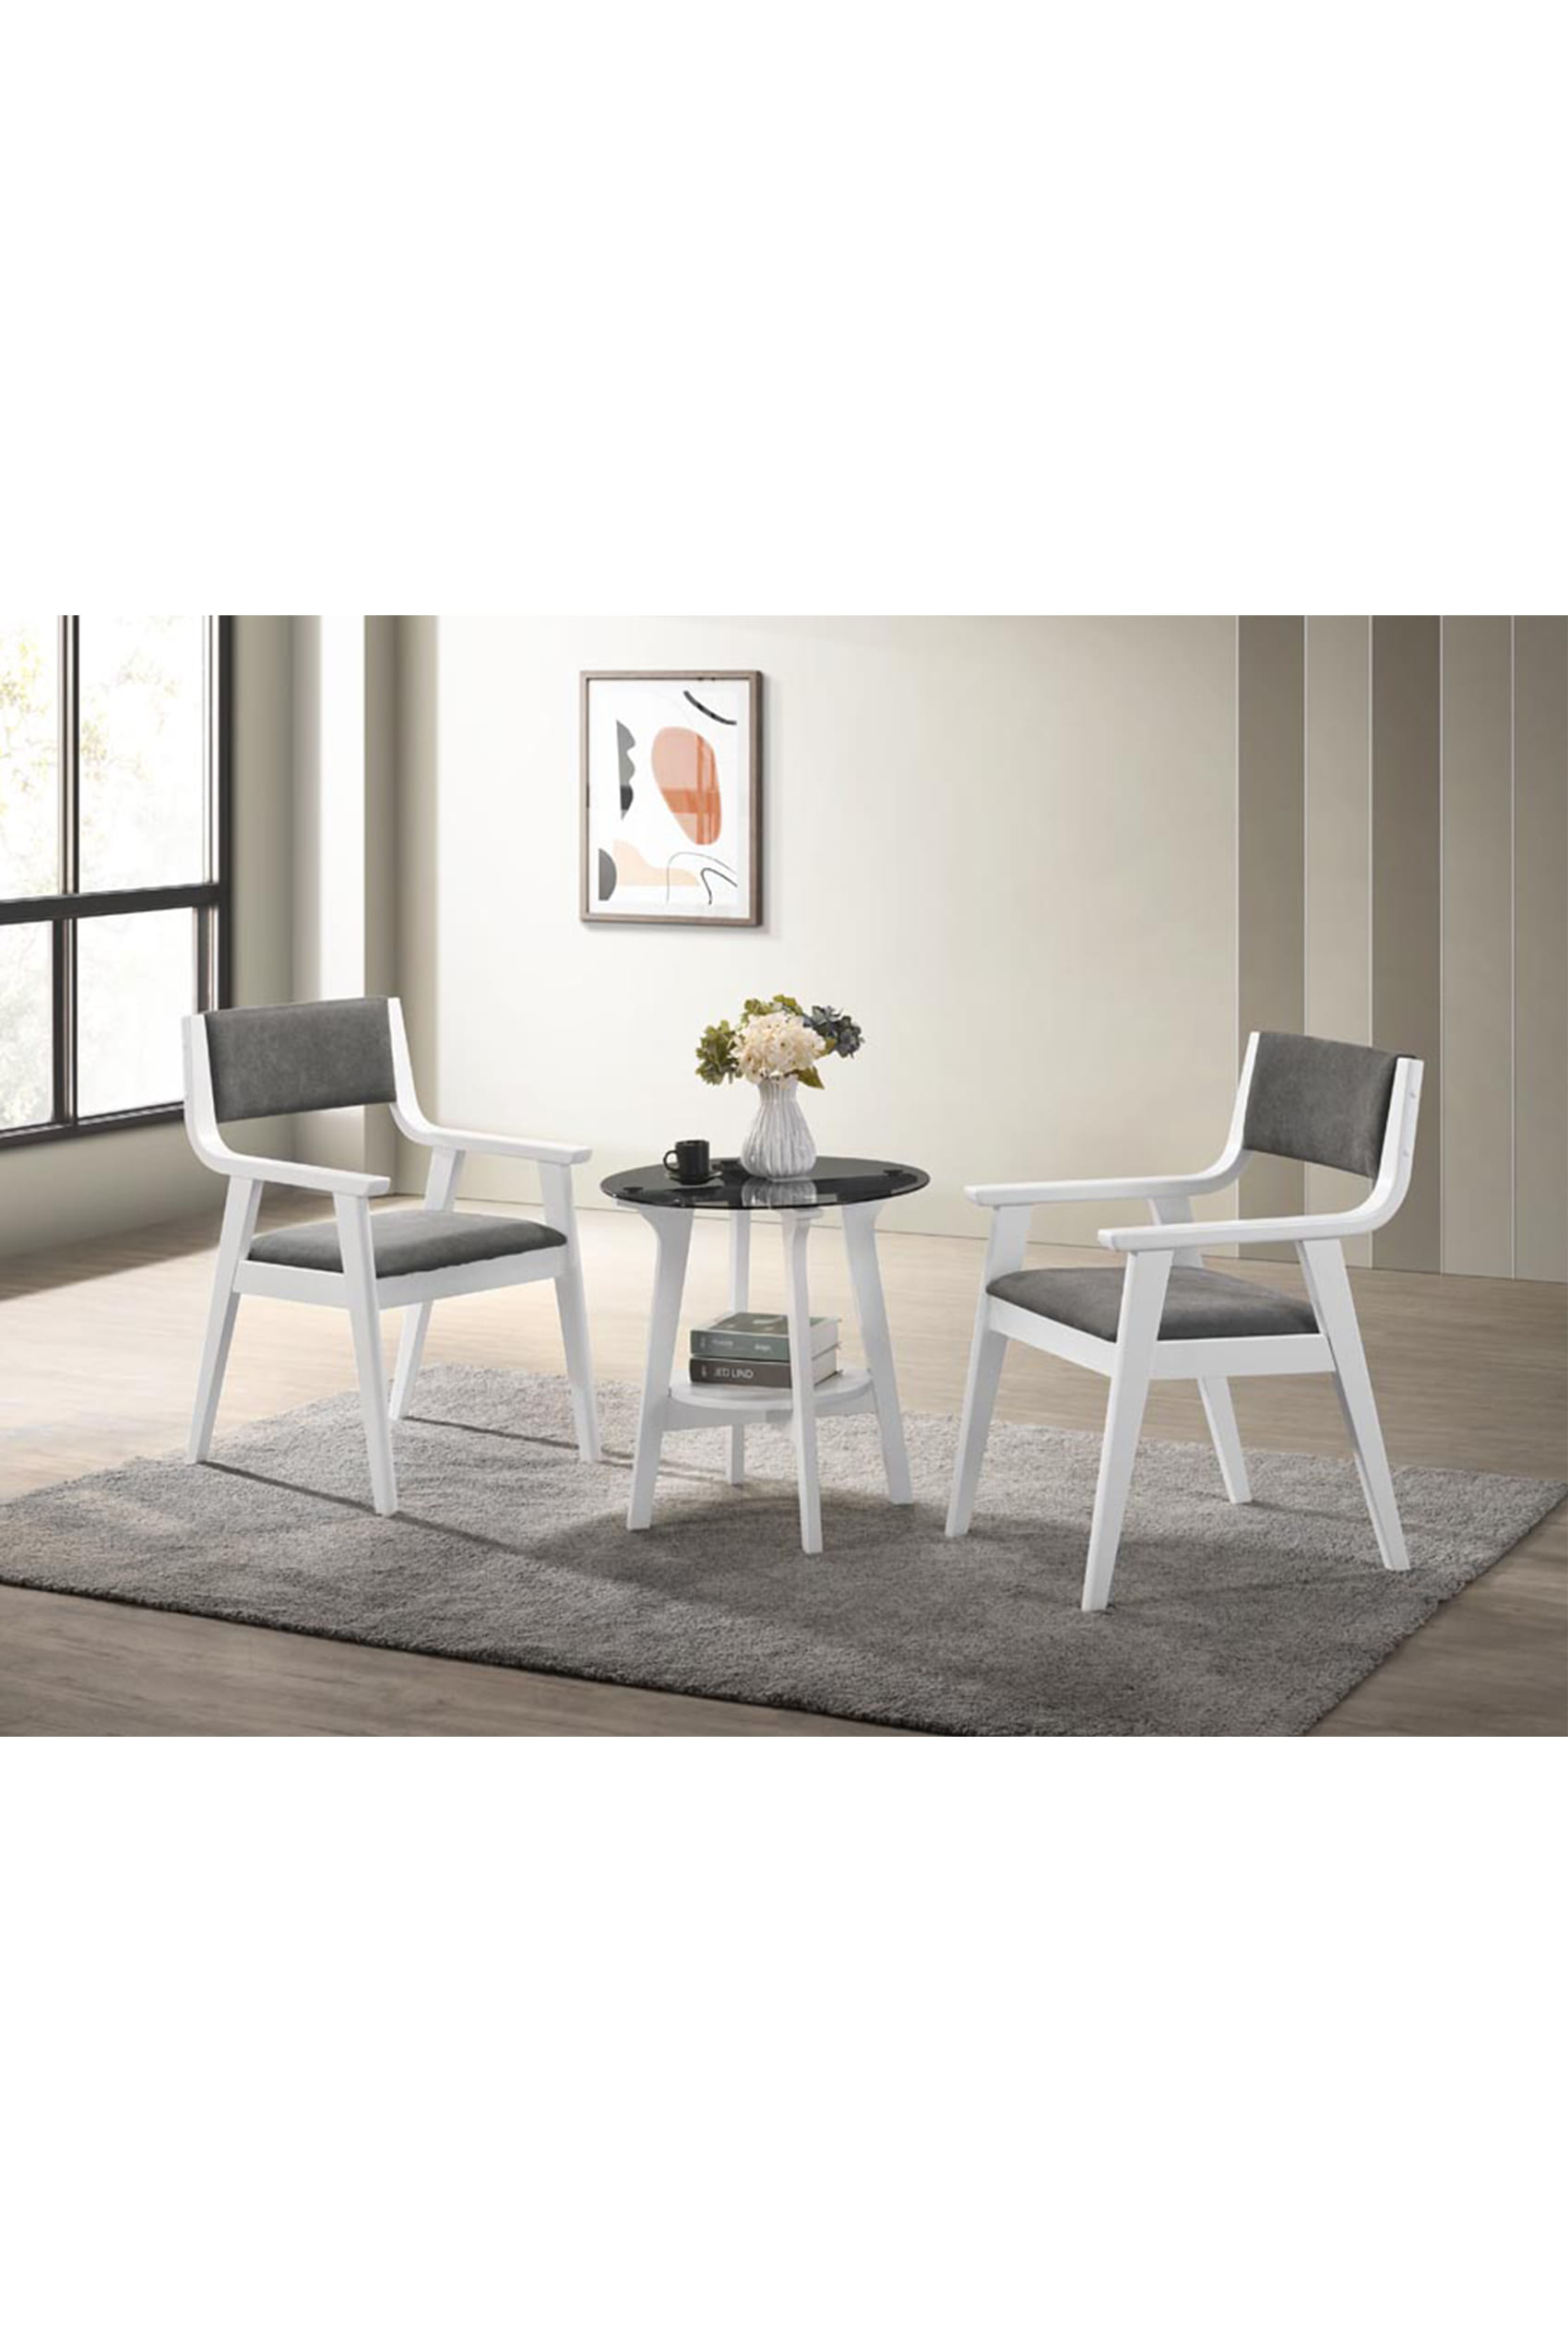 Kitakata Outdoor Set with Chita Dining Arm Chairs